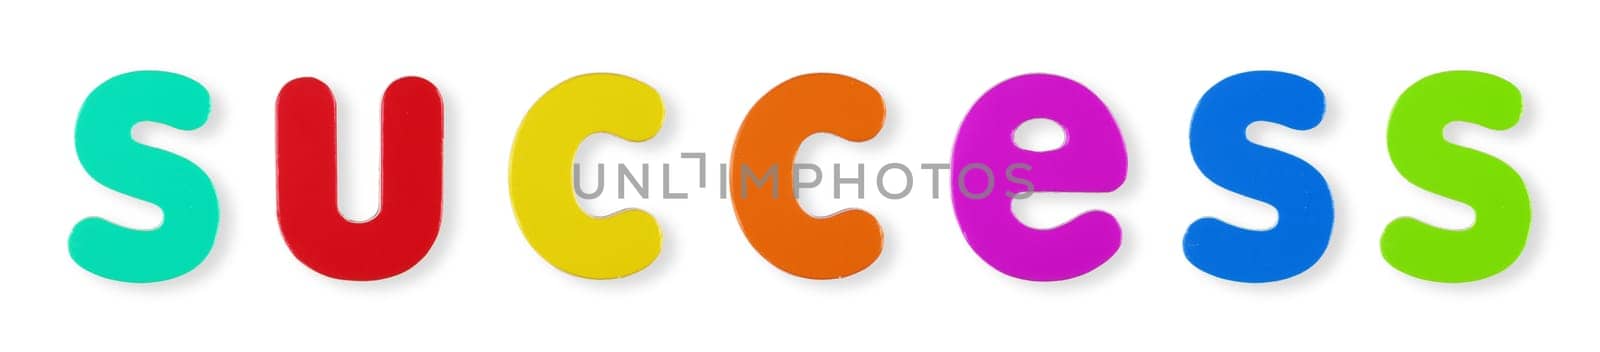 A Success word in coloured magnetic letters on white with clipping path to remove shadow